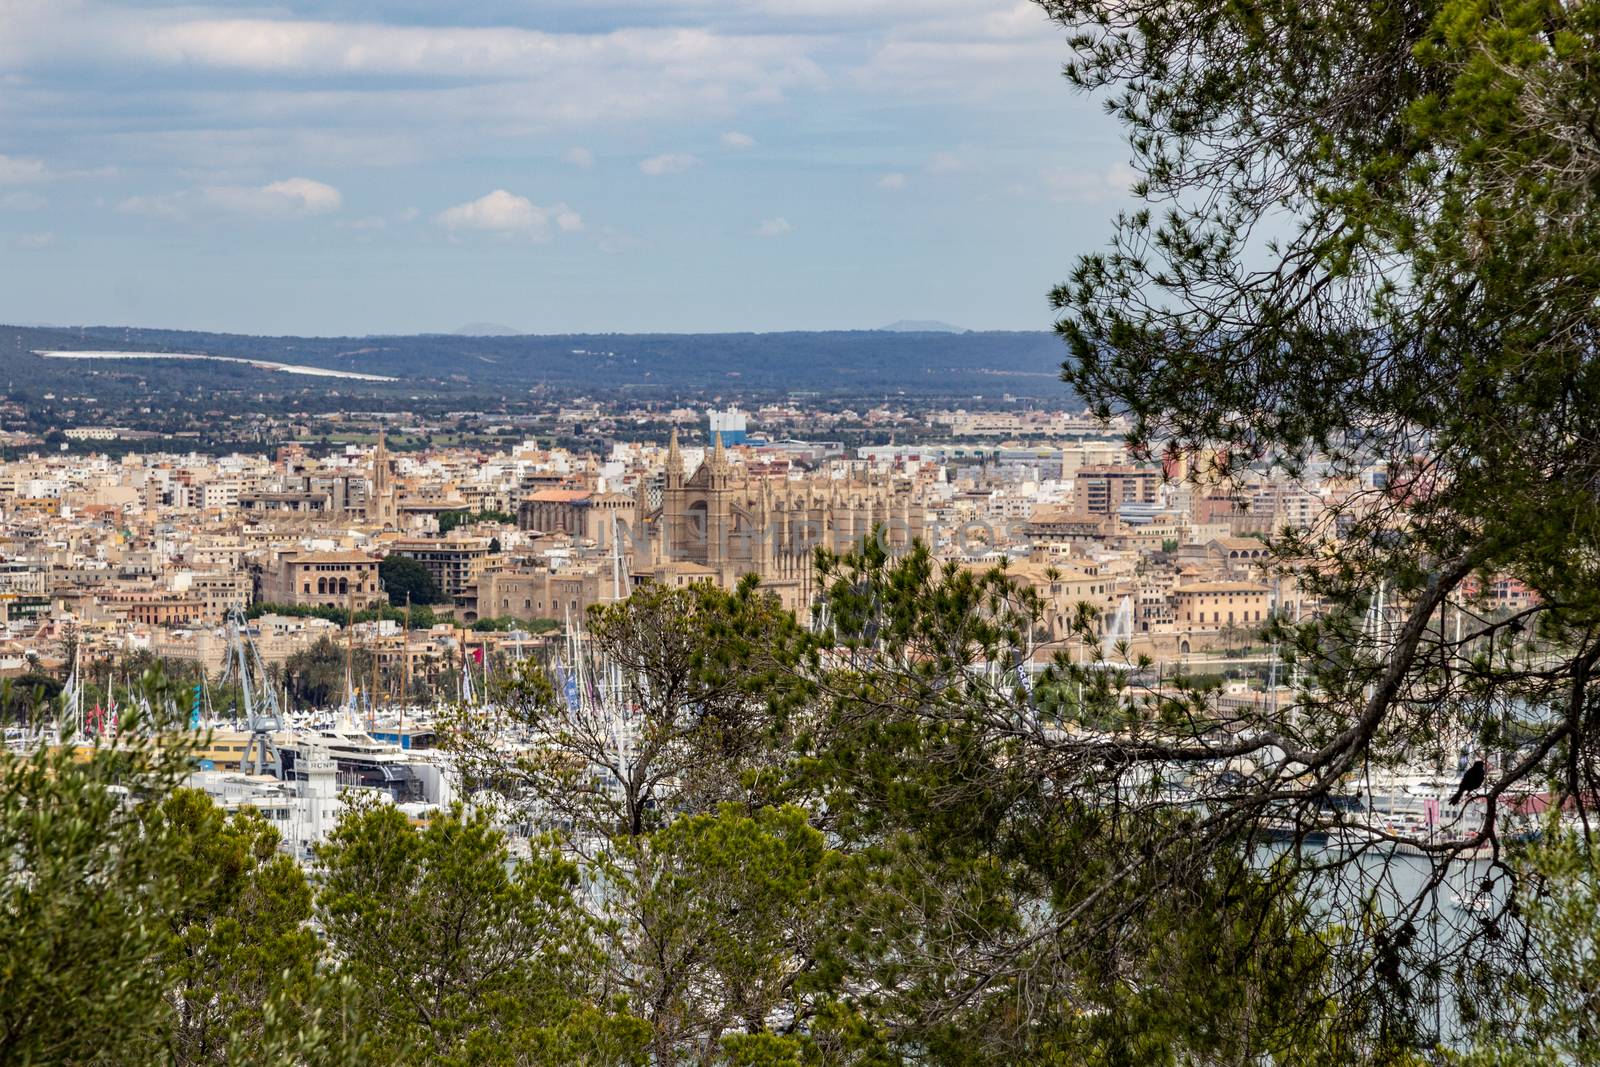 Scenic view from castle Bellver at Palma on balearic island Mallorca, Spain on a sunny day